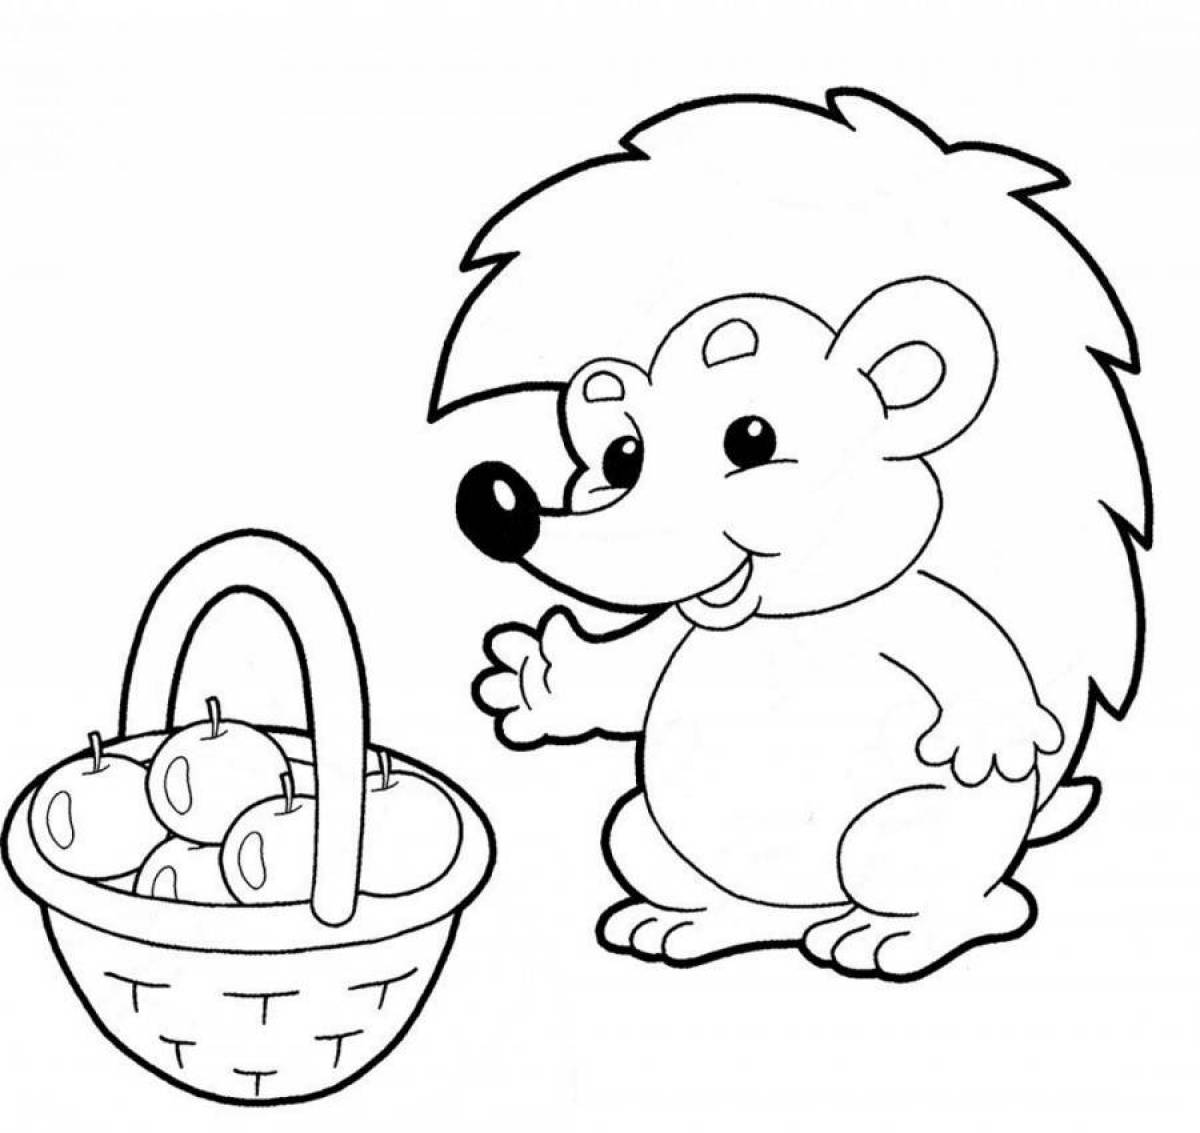 Fun coloring book for 2-3 year olds in kindergarten